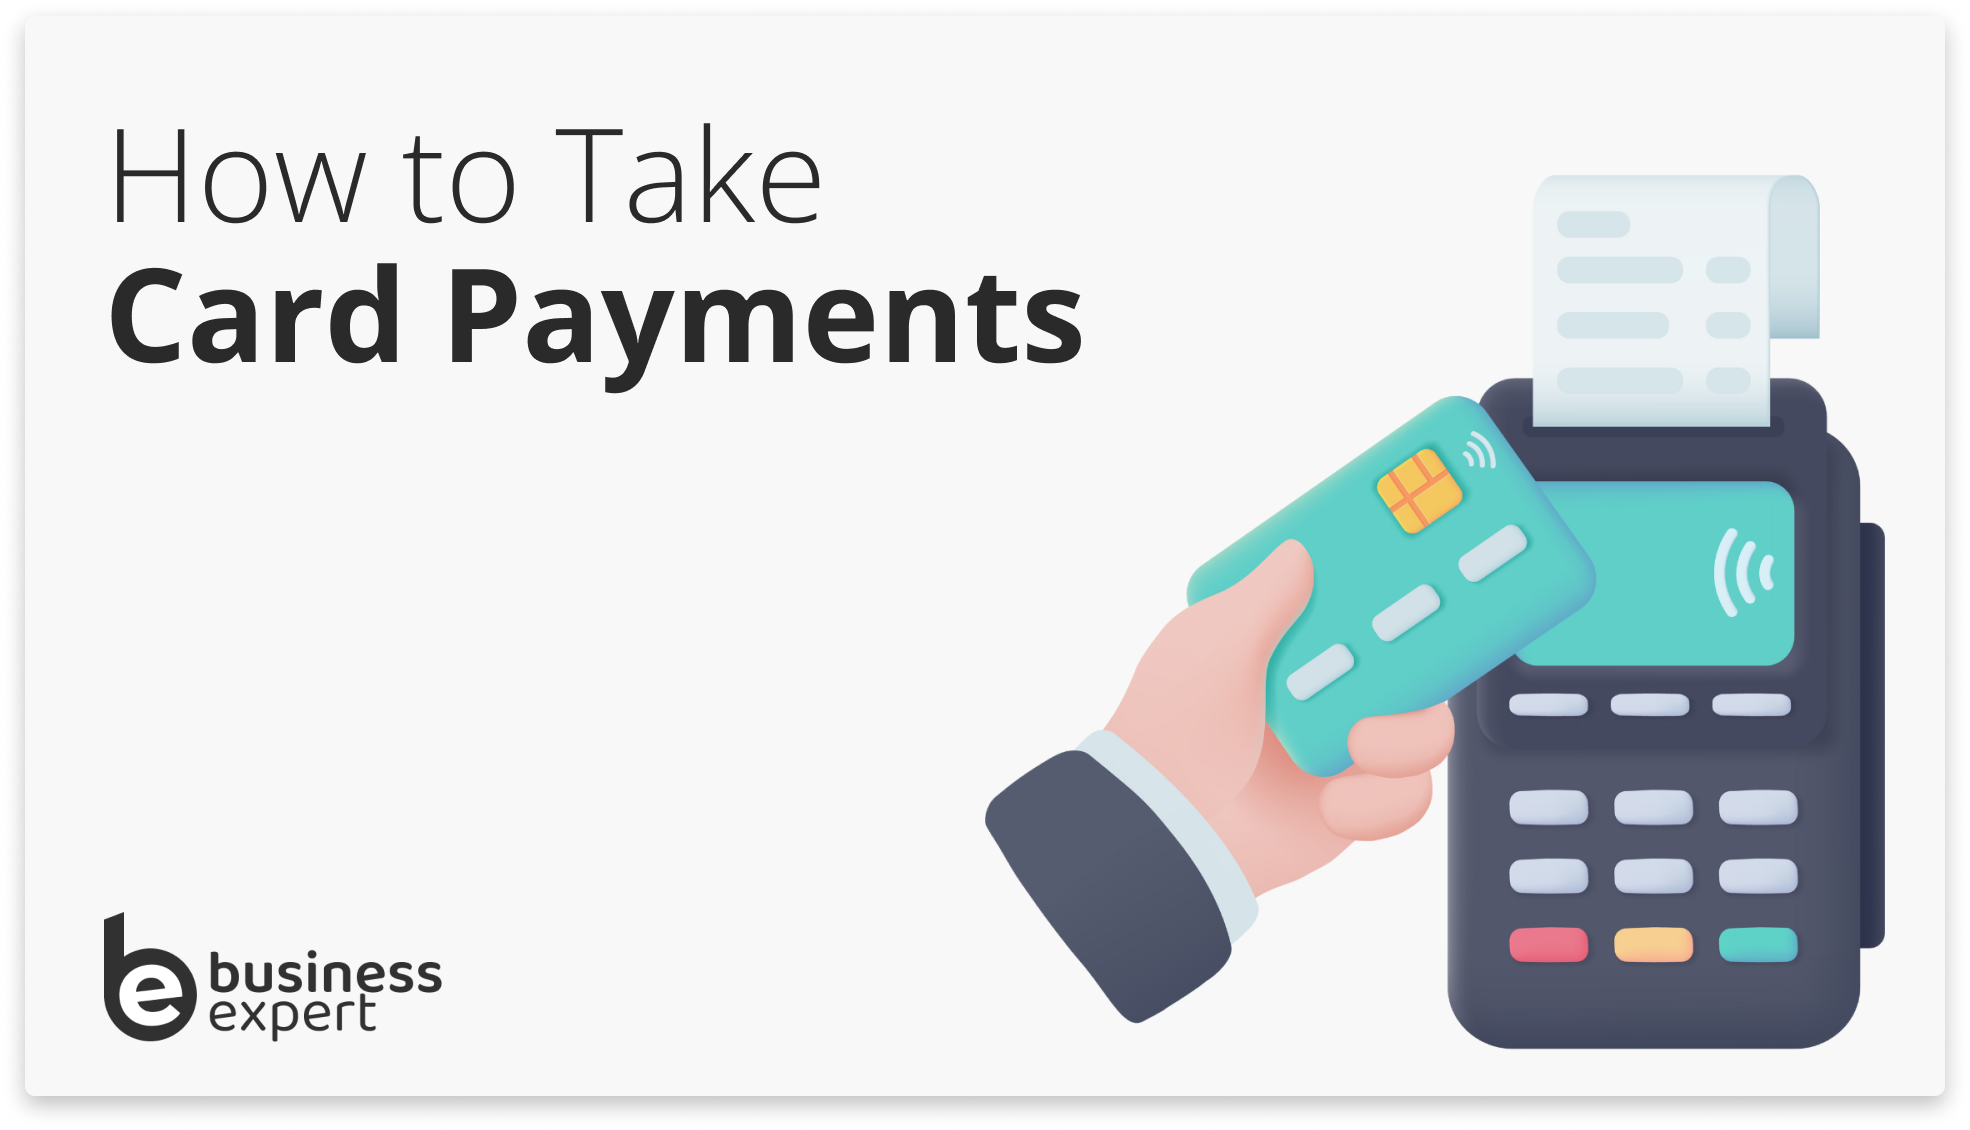 Take card payments